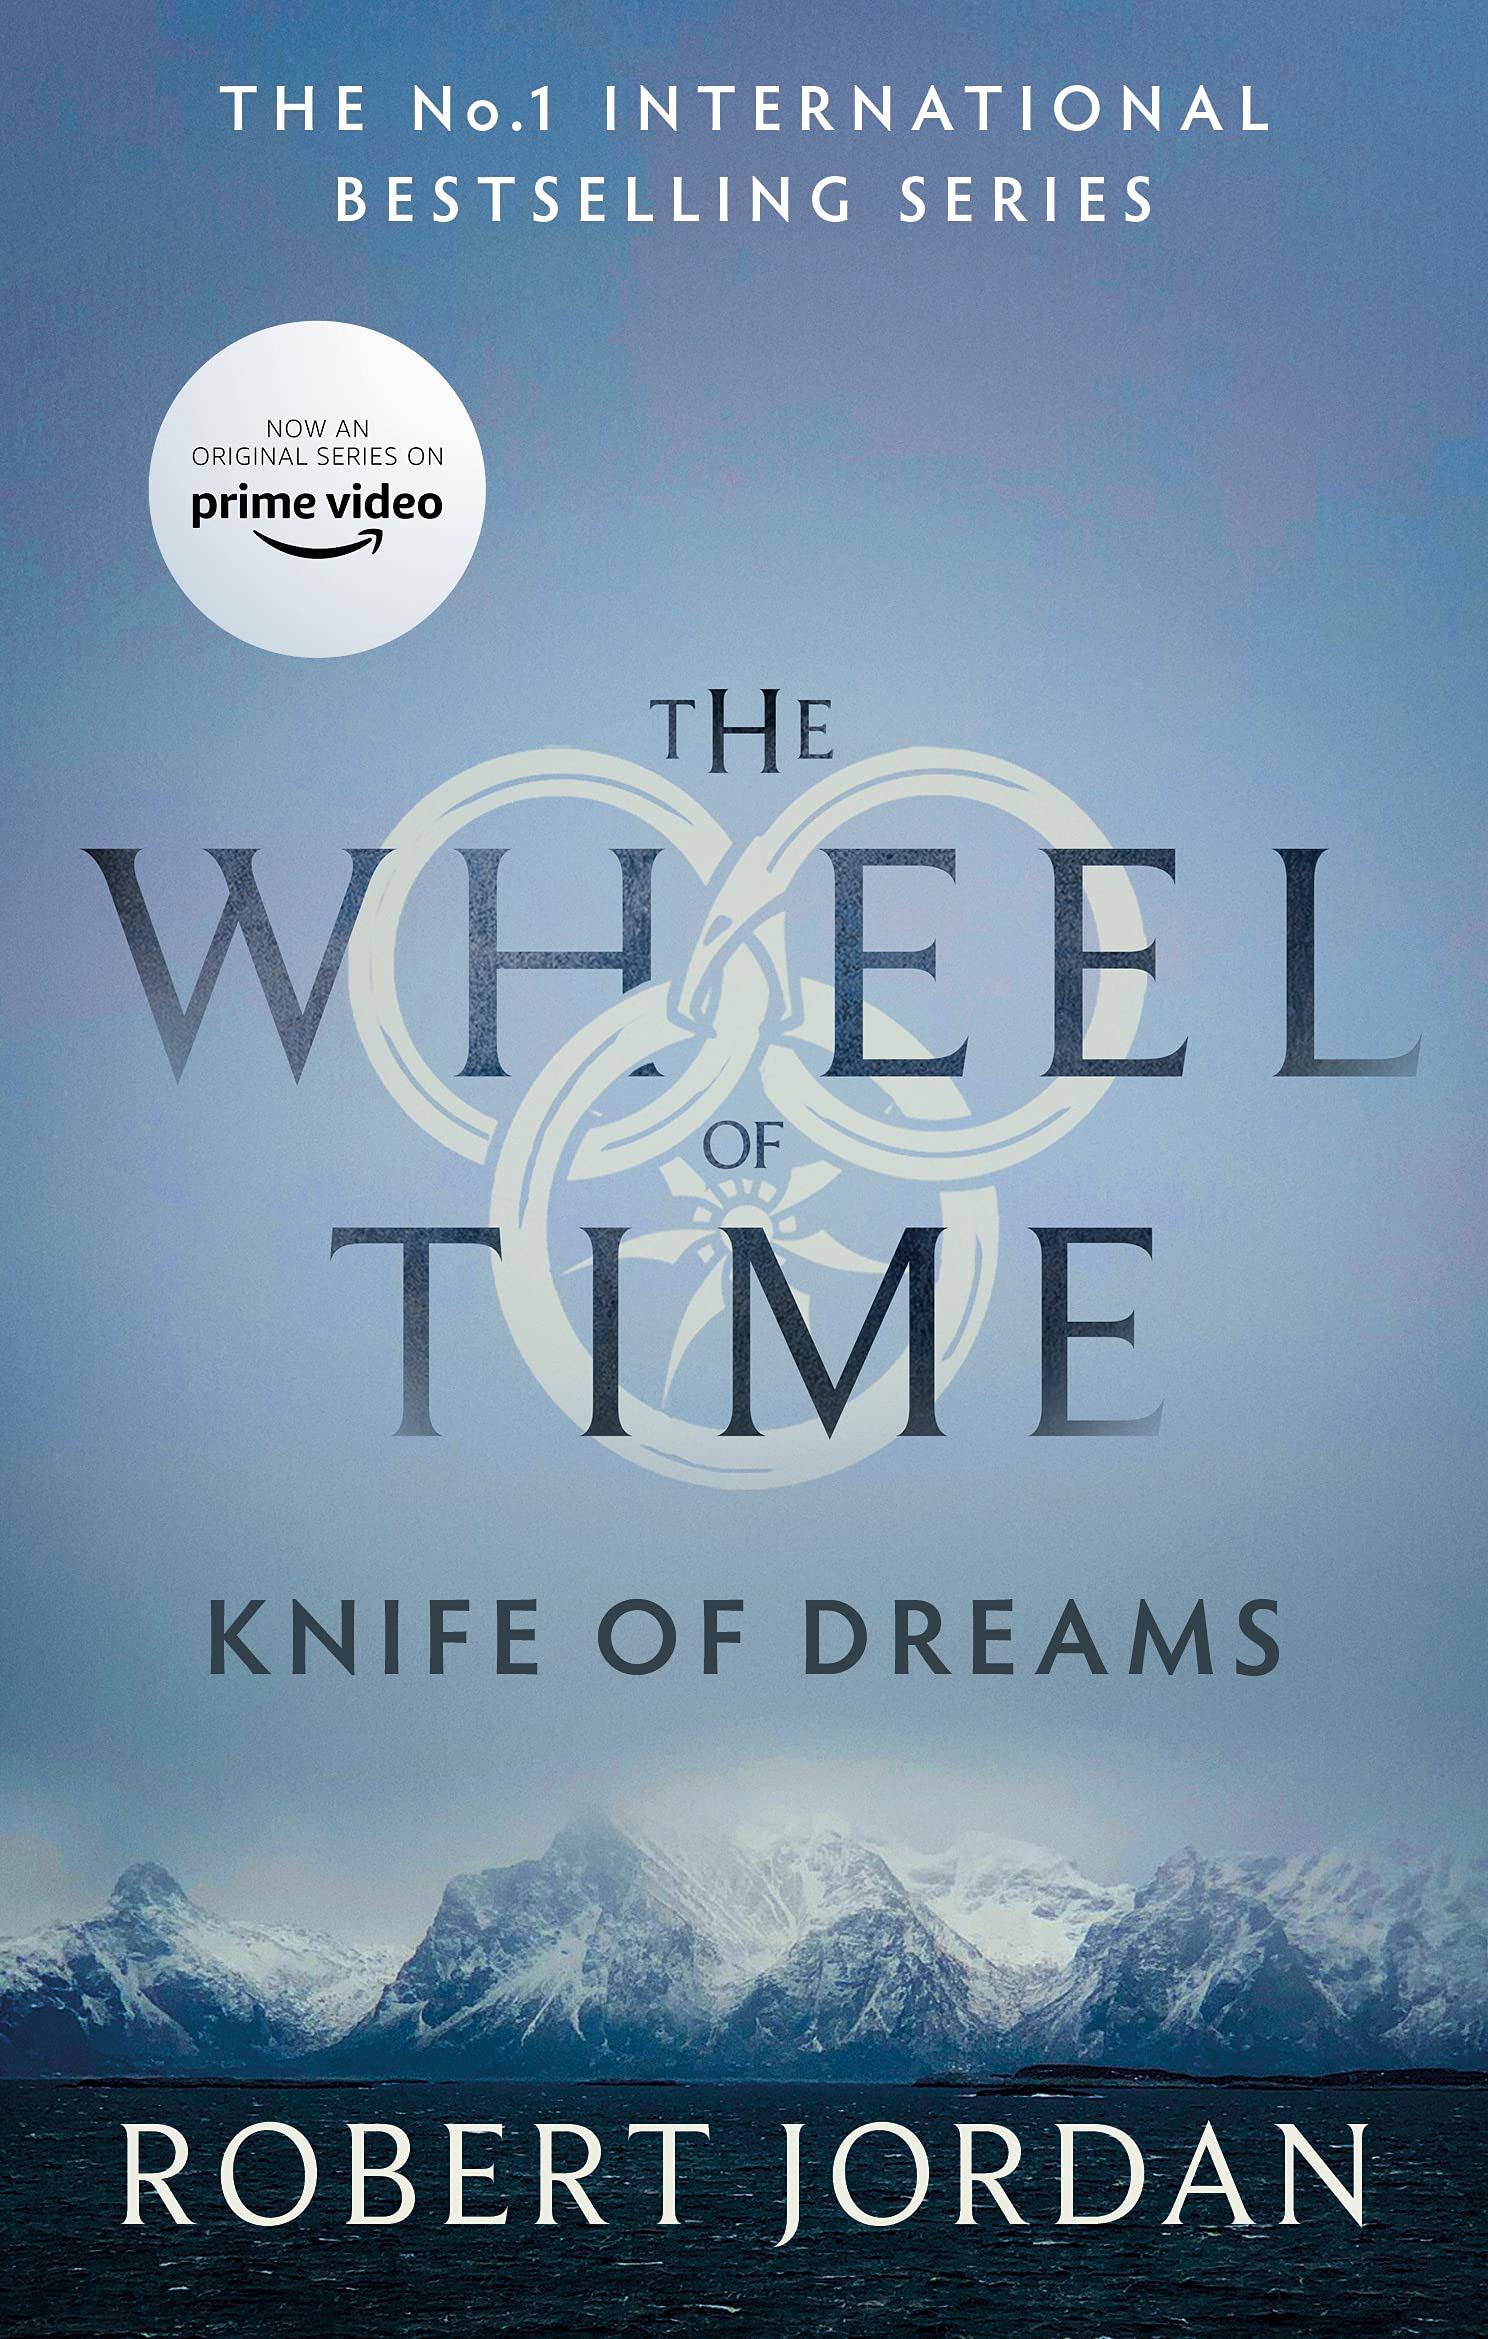 Knife of Dreams: Book 11 of the Wheel of Time (Now a Major TV Series) [Book]